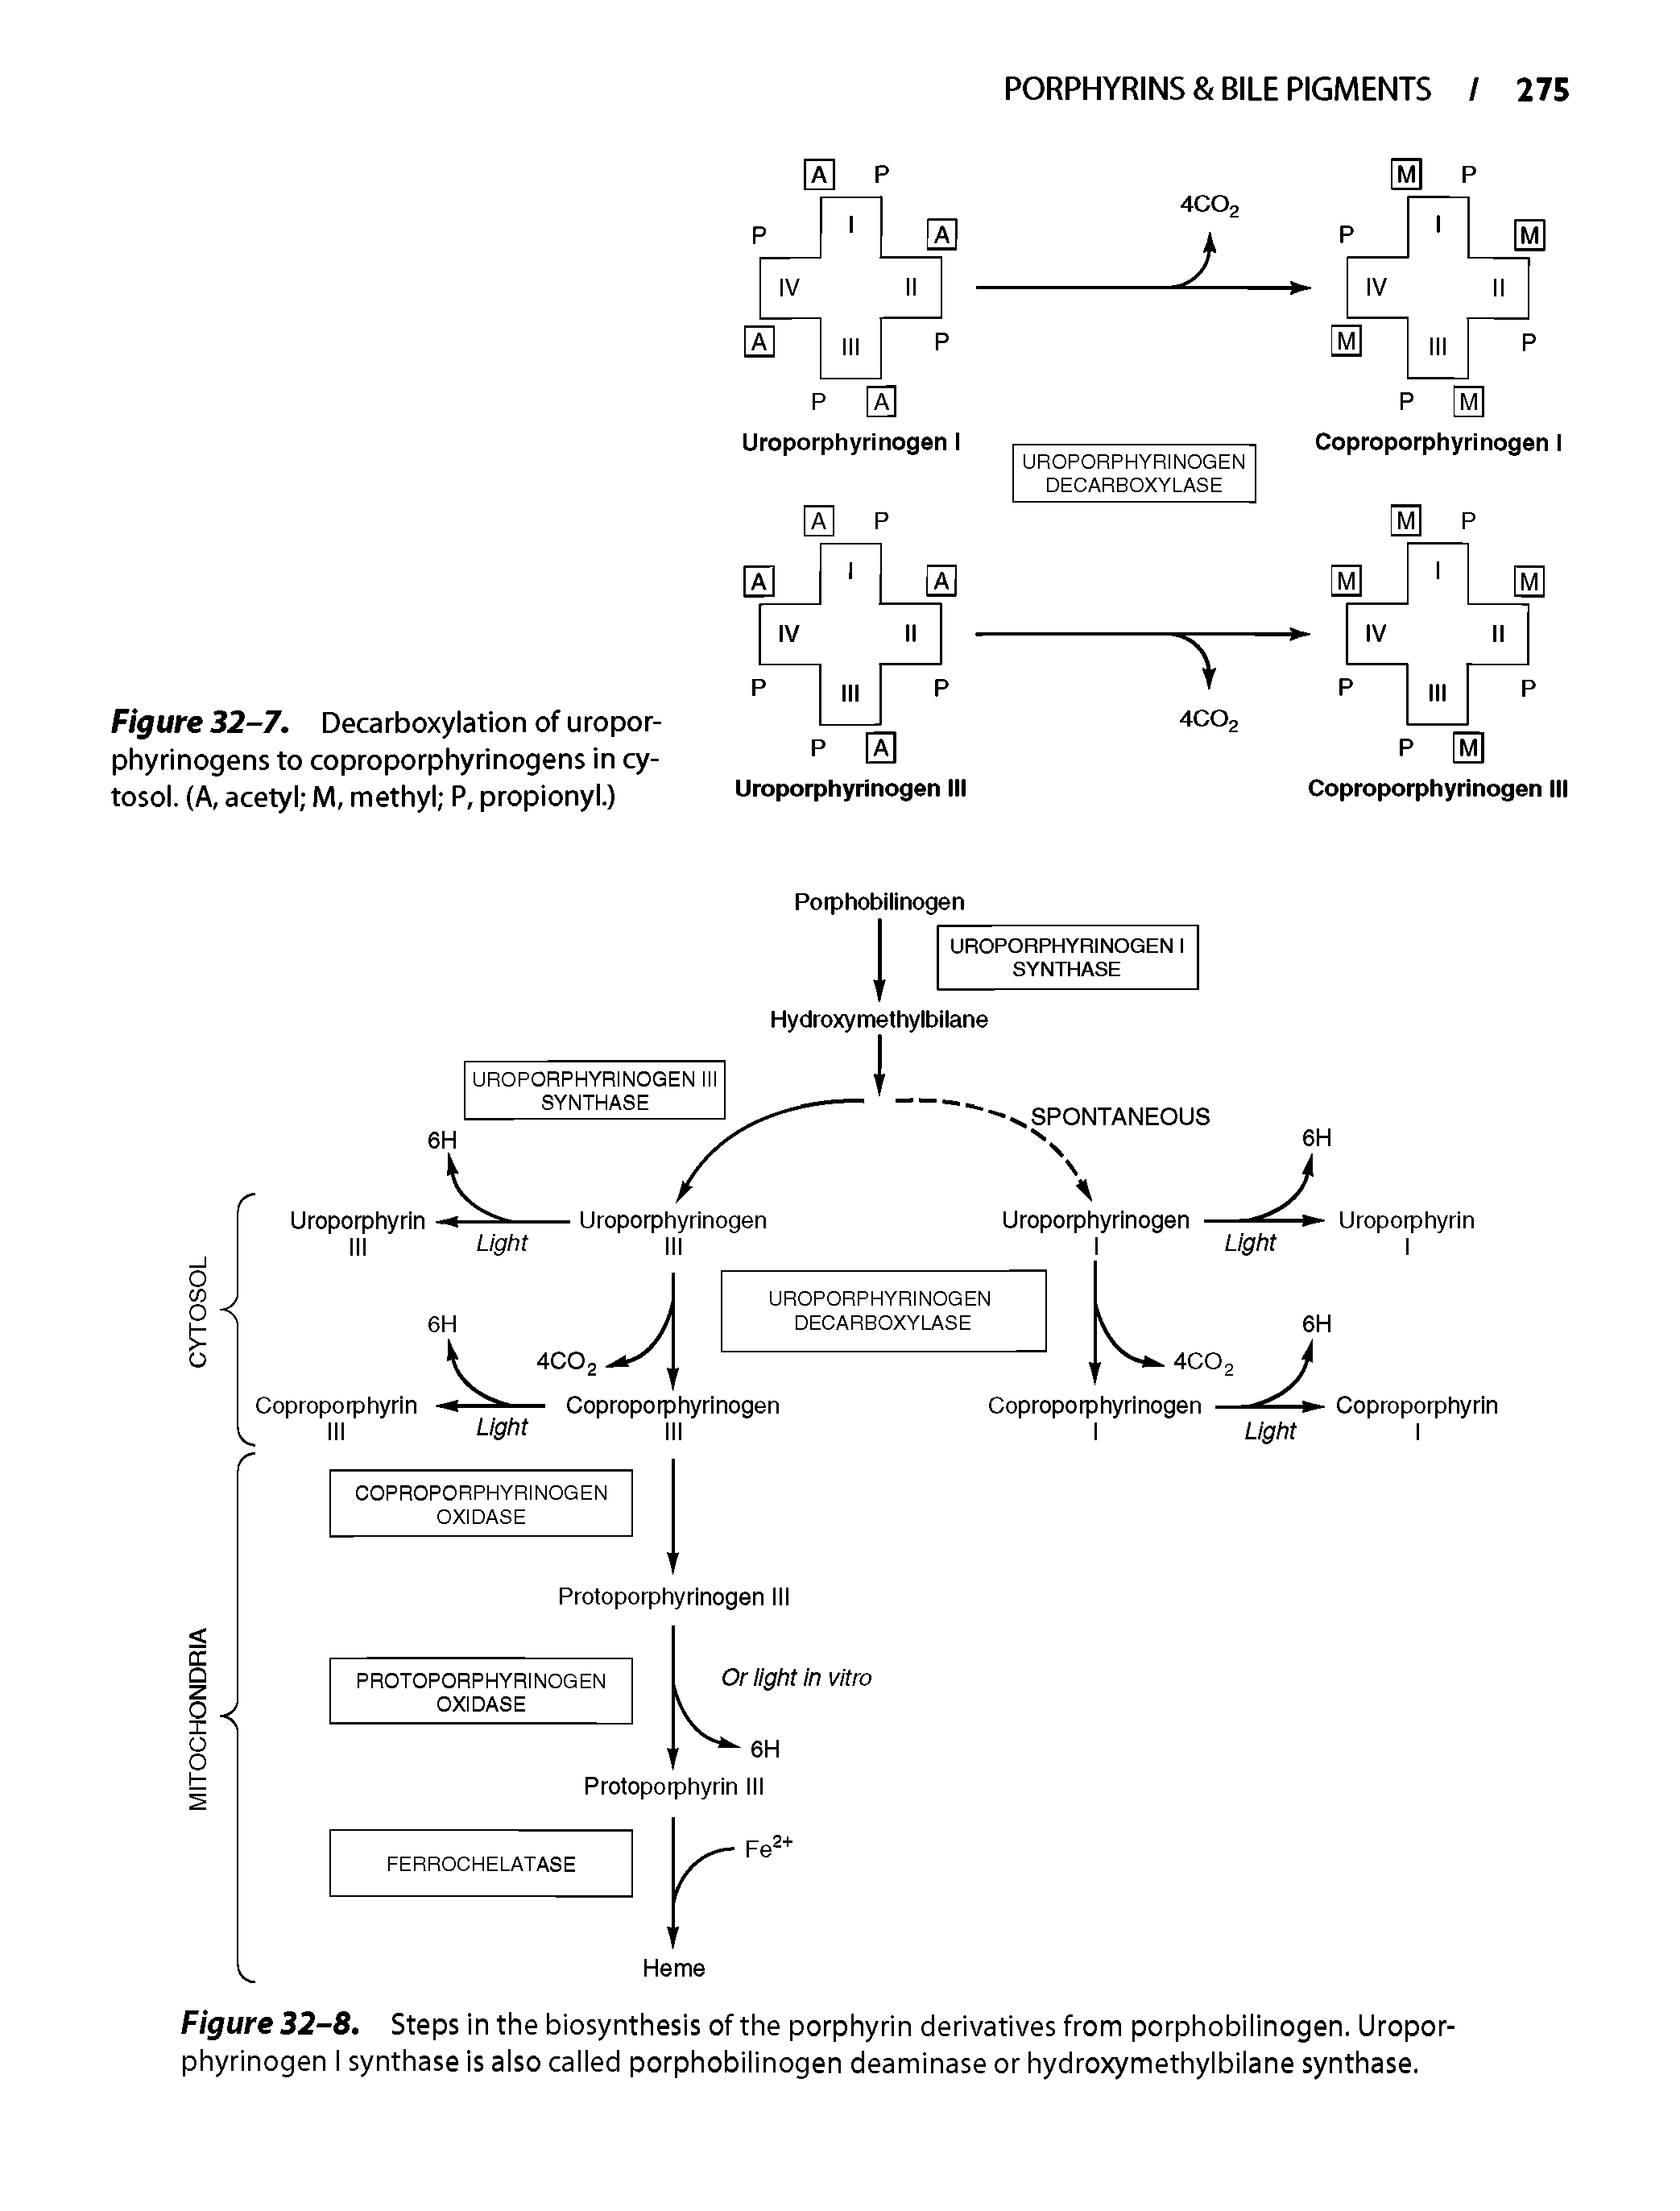 Figure 32-8. Steps in the biosynthesis of the porphyrin derivatives from porphobiiinogen. Uroporphyrinogen i synthase is aiso caiied porphobiiinogen deaminase or hydroxymethyibiiane synthase.